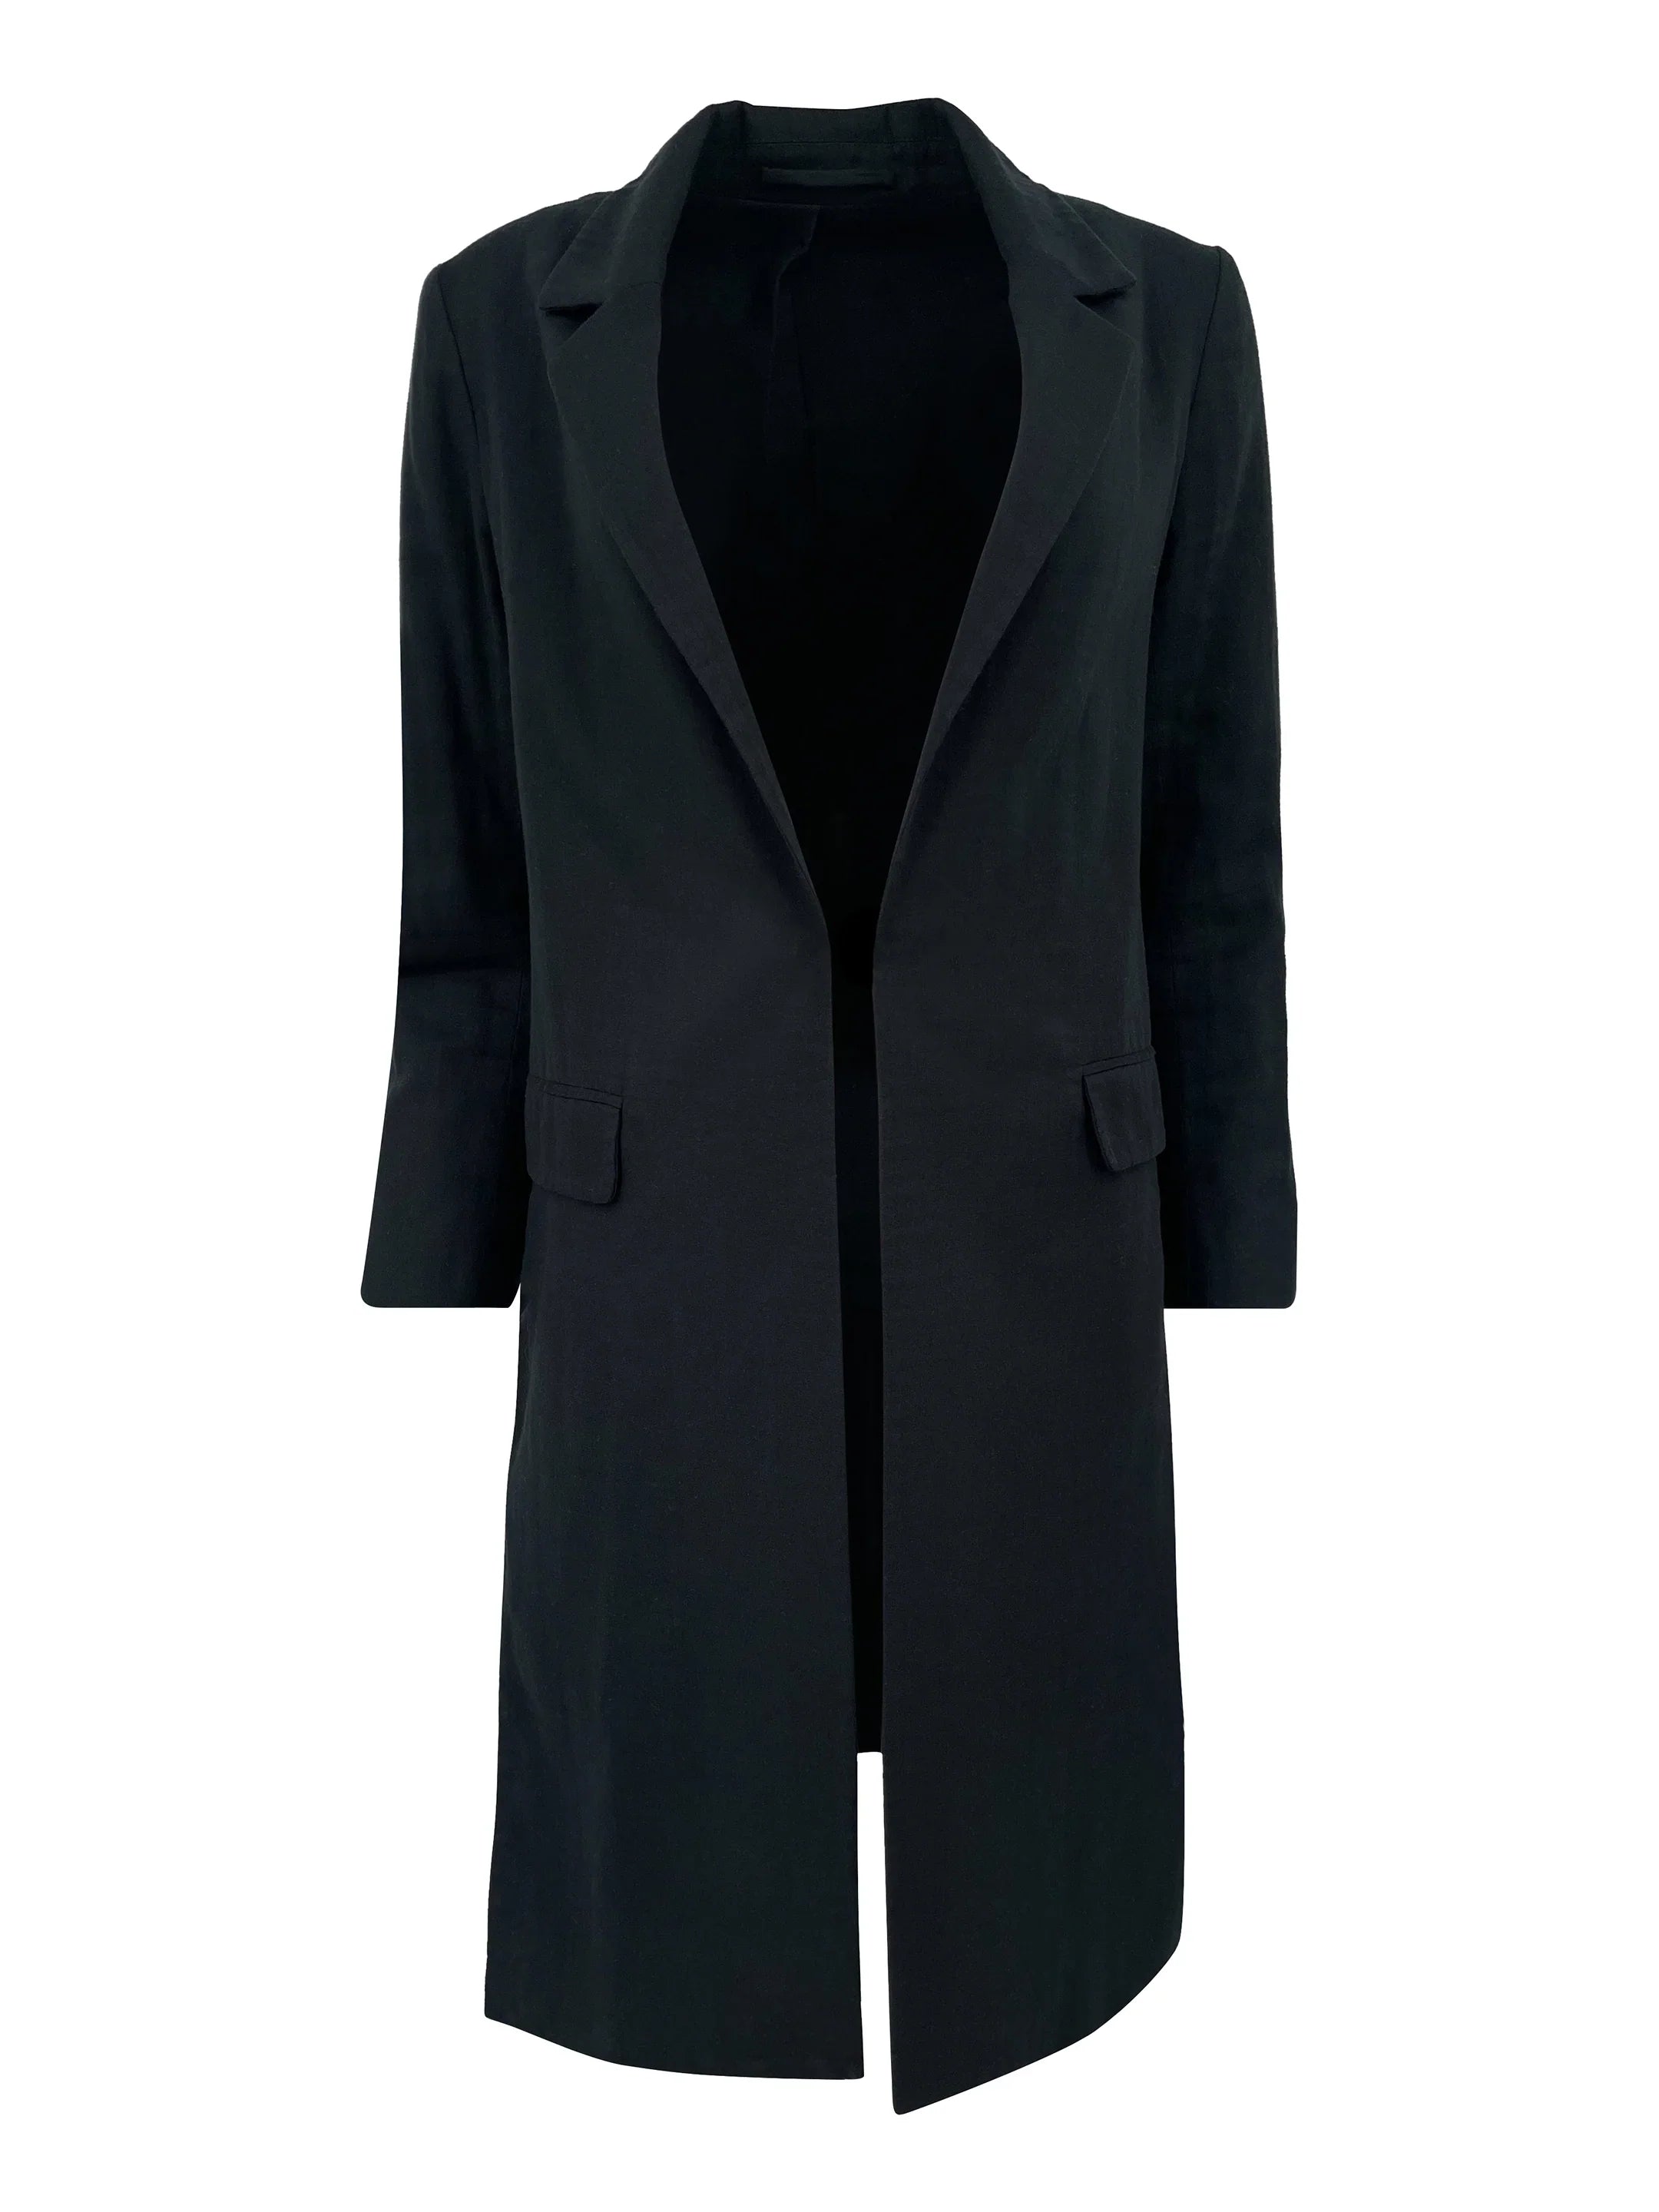 Women's Knee Length Blazer with Slit Up the Sides